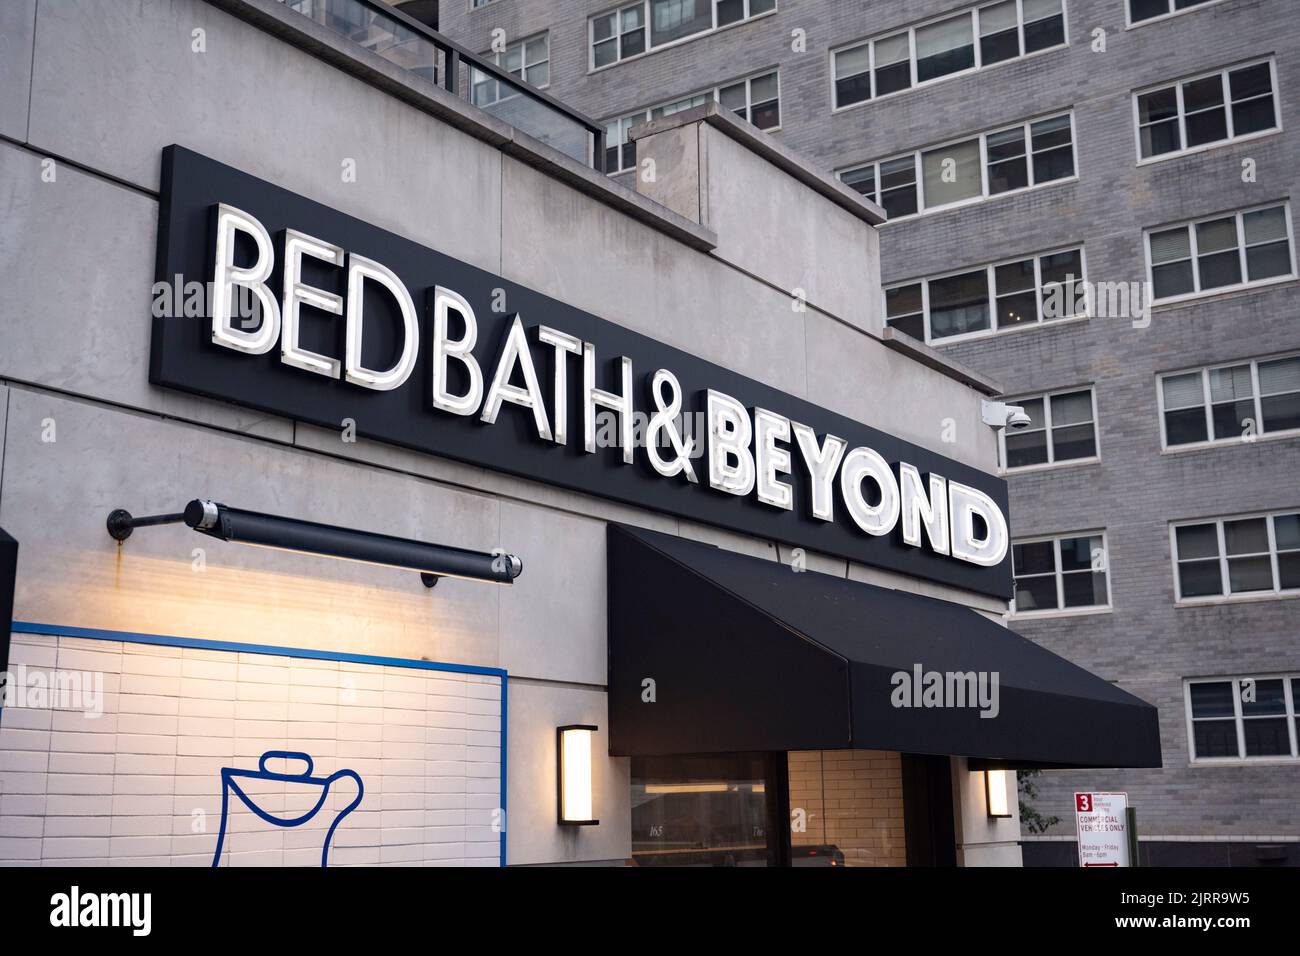 New York, New York, USA. 25th Aug, 2022. August 25, 2022: New York City, USA: A Bed Bath and Beyond location on 3rd Avenue in Midtown Manhattan. $BBBY stock was targeted by the popular meme stock reddit community Wall Street Bets, famous for inflating the price of $GME Gamestop stock, in a short squeeze opportunity to make money off of Private Equity hedge funds attempting to short sale large volumes of retail stocks. Billionaire activist shareholder Ryan Cohen exited from the stock and sold off his 10% stake, but the company recently raised a new loan with the help of J.P. Morgan Chase. (Cr Stock Photo